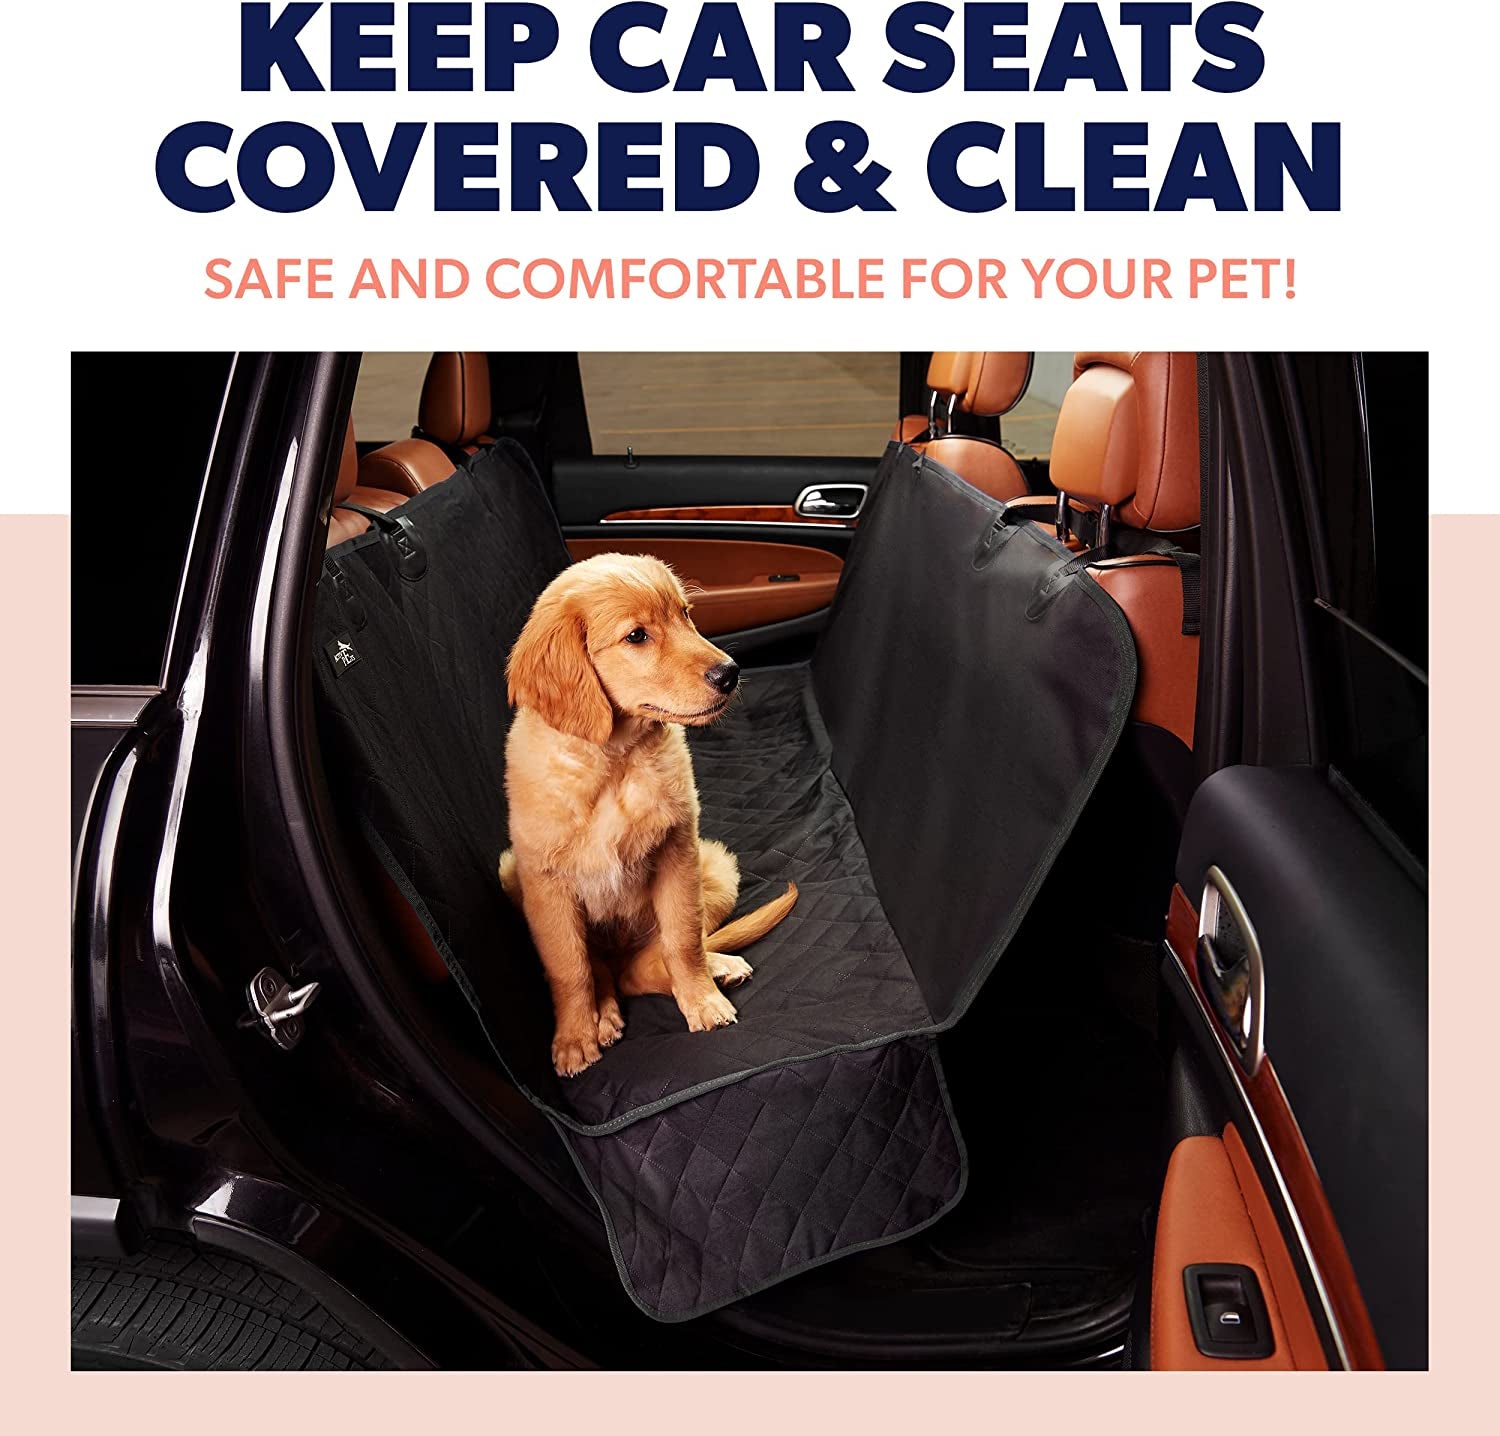 Dog Car Seat Cover for Back Seat. Dog Hammock for Cars - Waterproof Pet Seat Cover for Trucks and Suvs, Nonslip and Durable - Black, Standard - PETGS